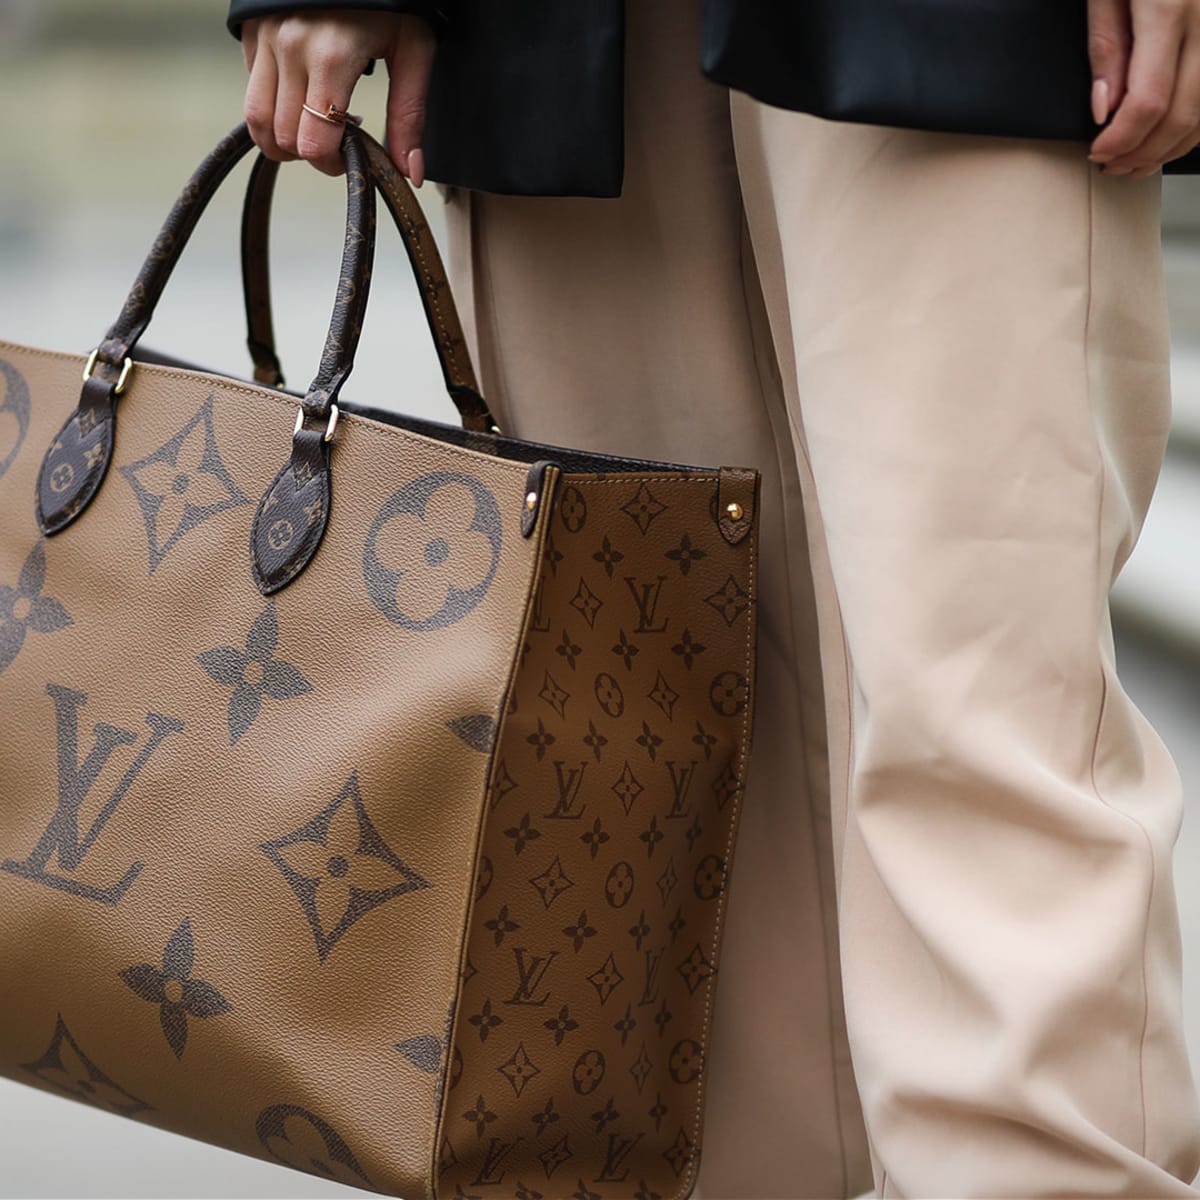 Luxury Bags Are Selling Really Well - TheStreet